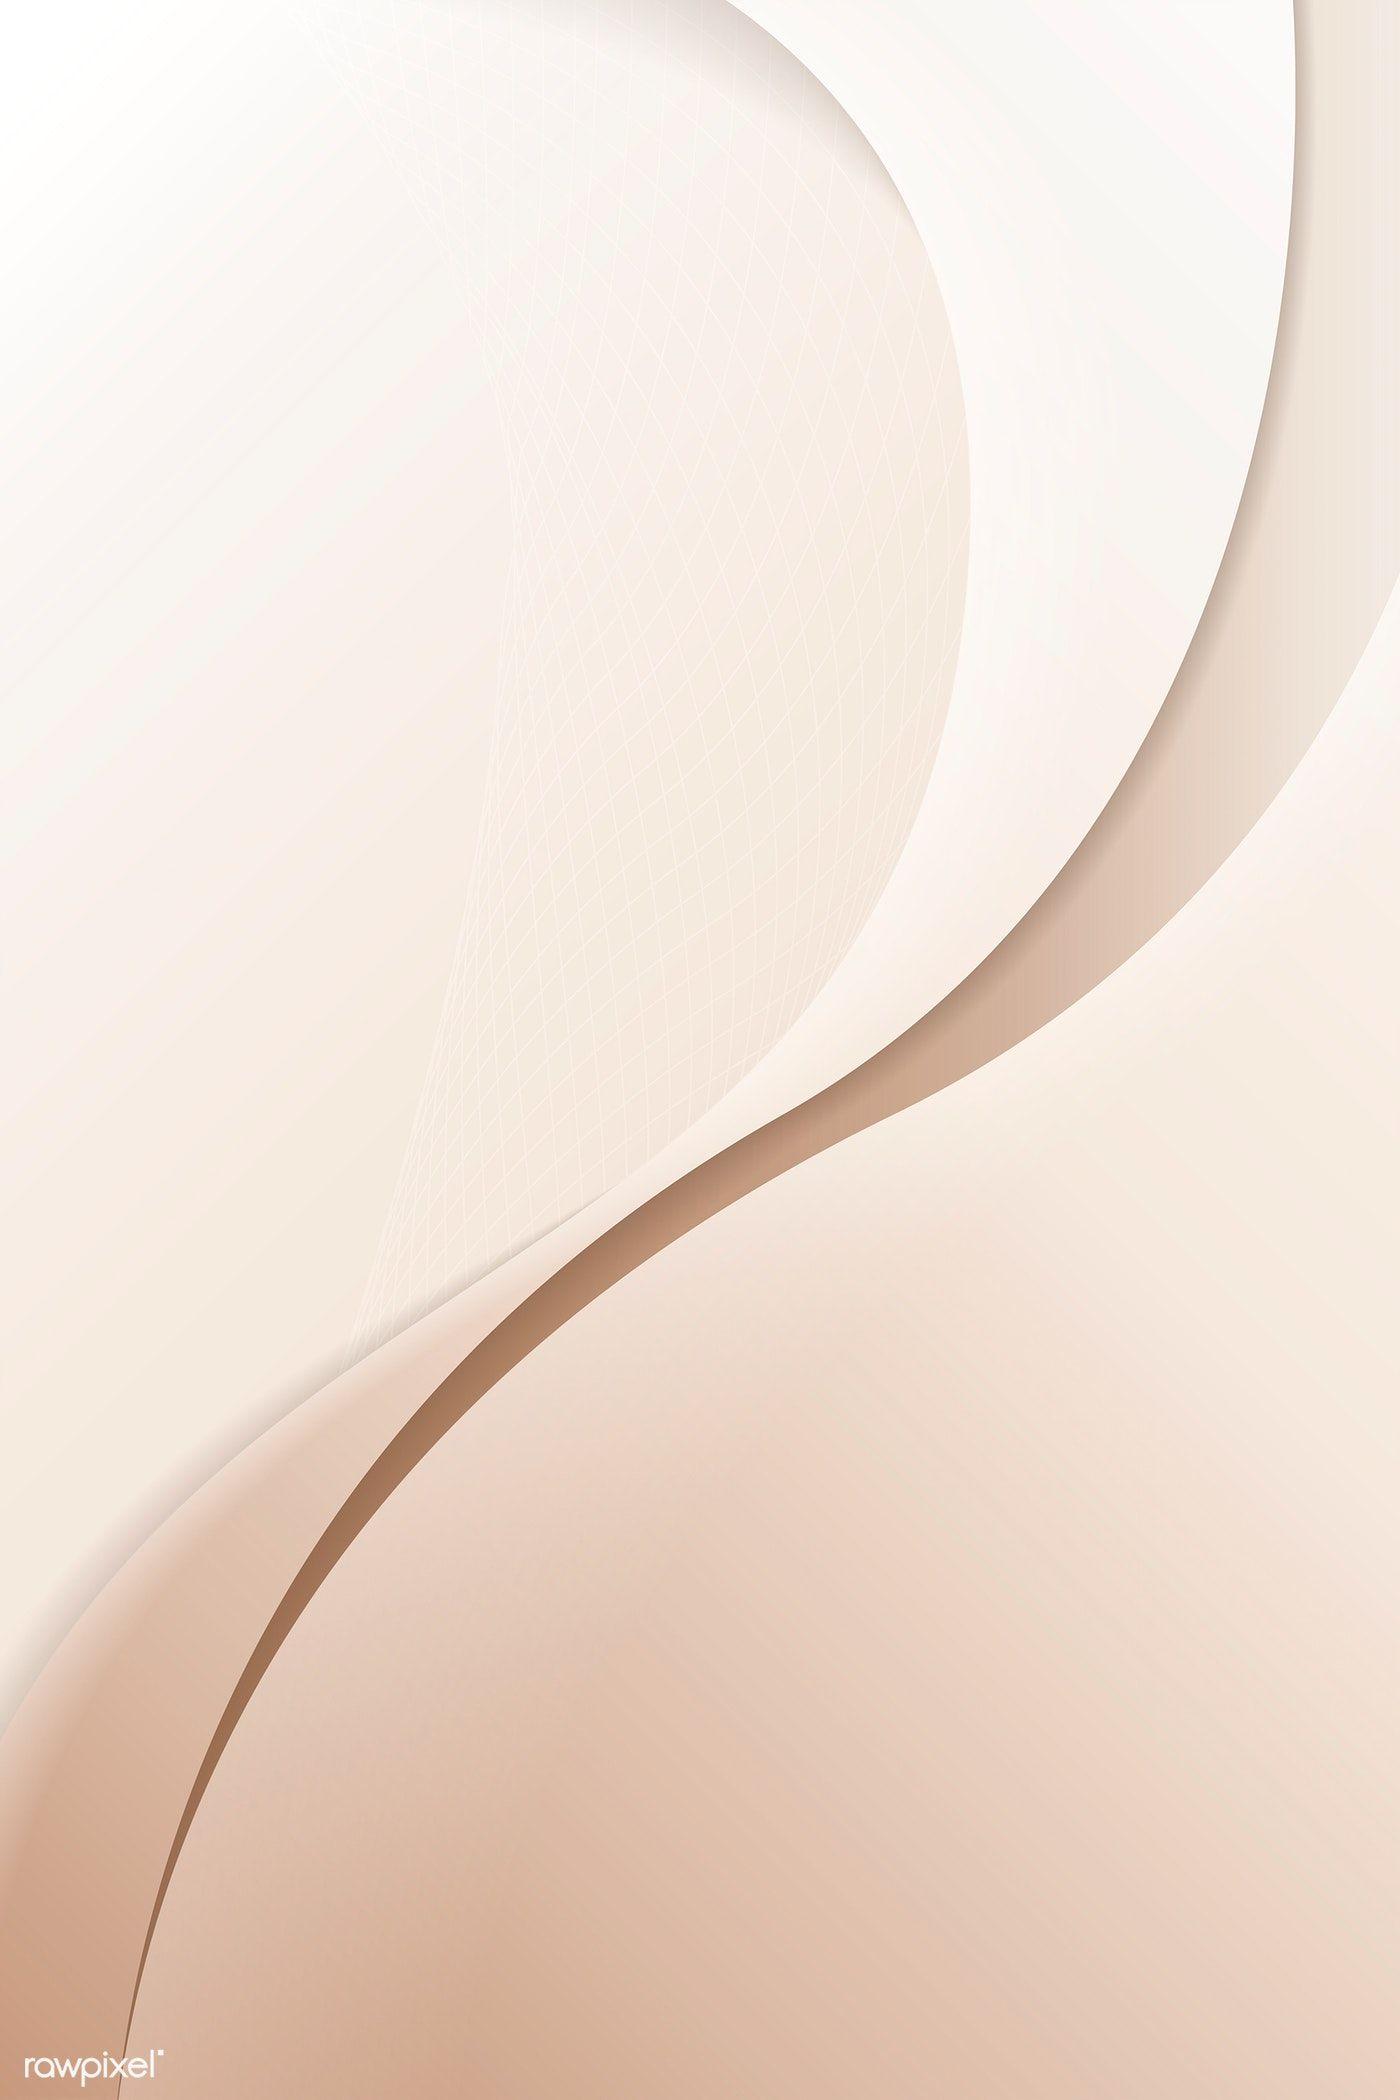 Beige Abstract Wallpaper Background Image